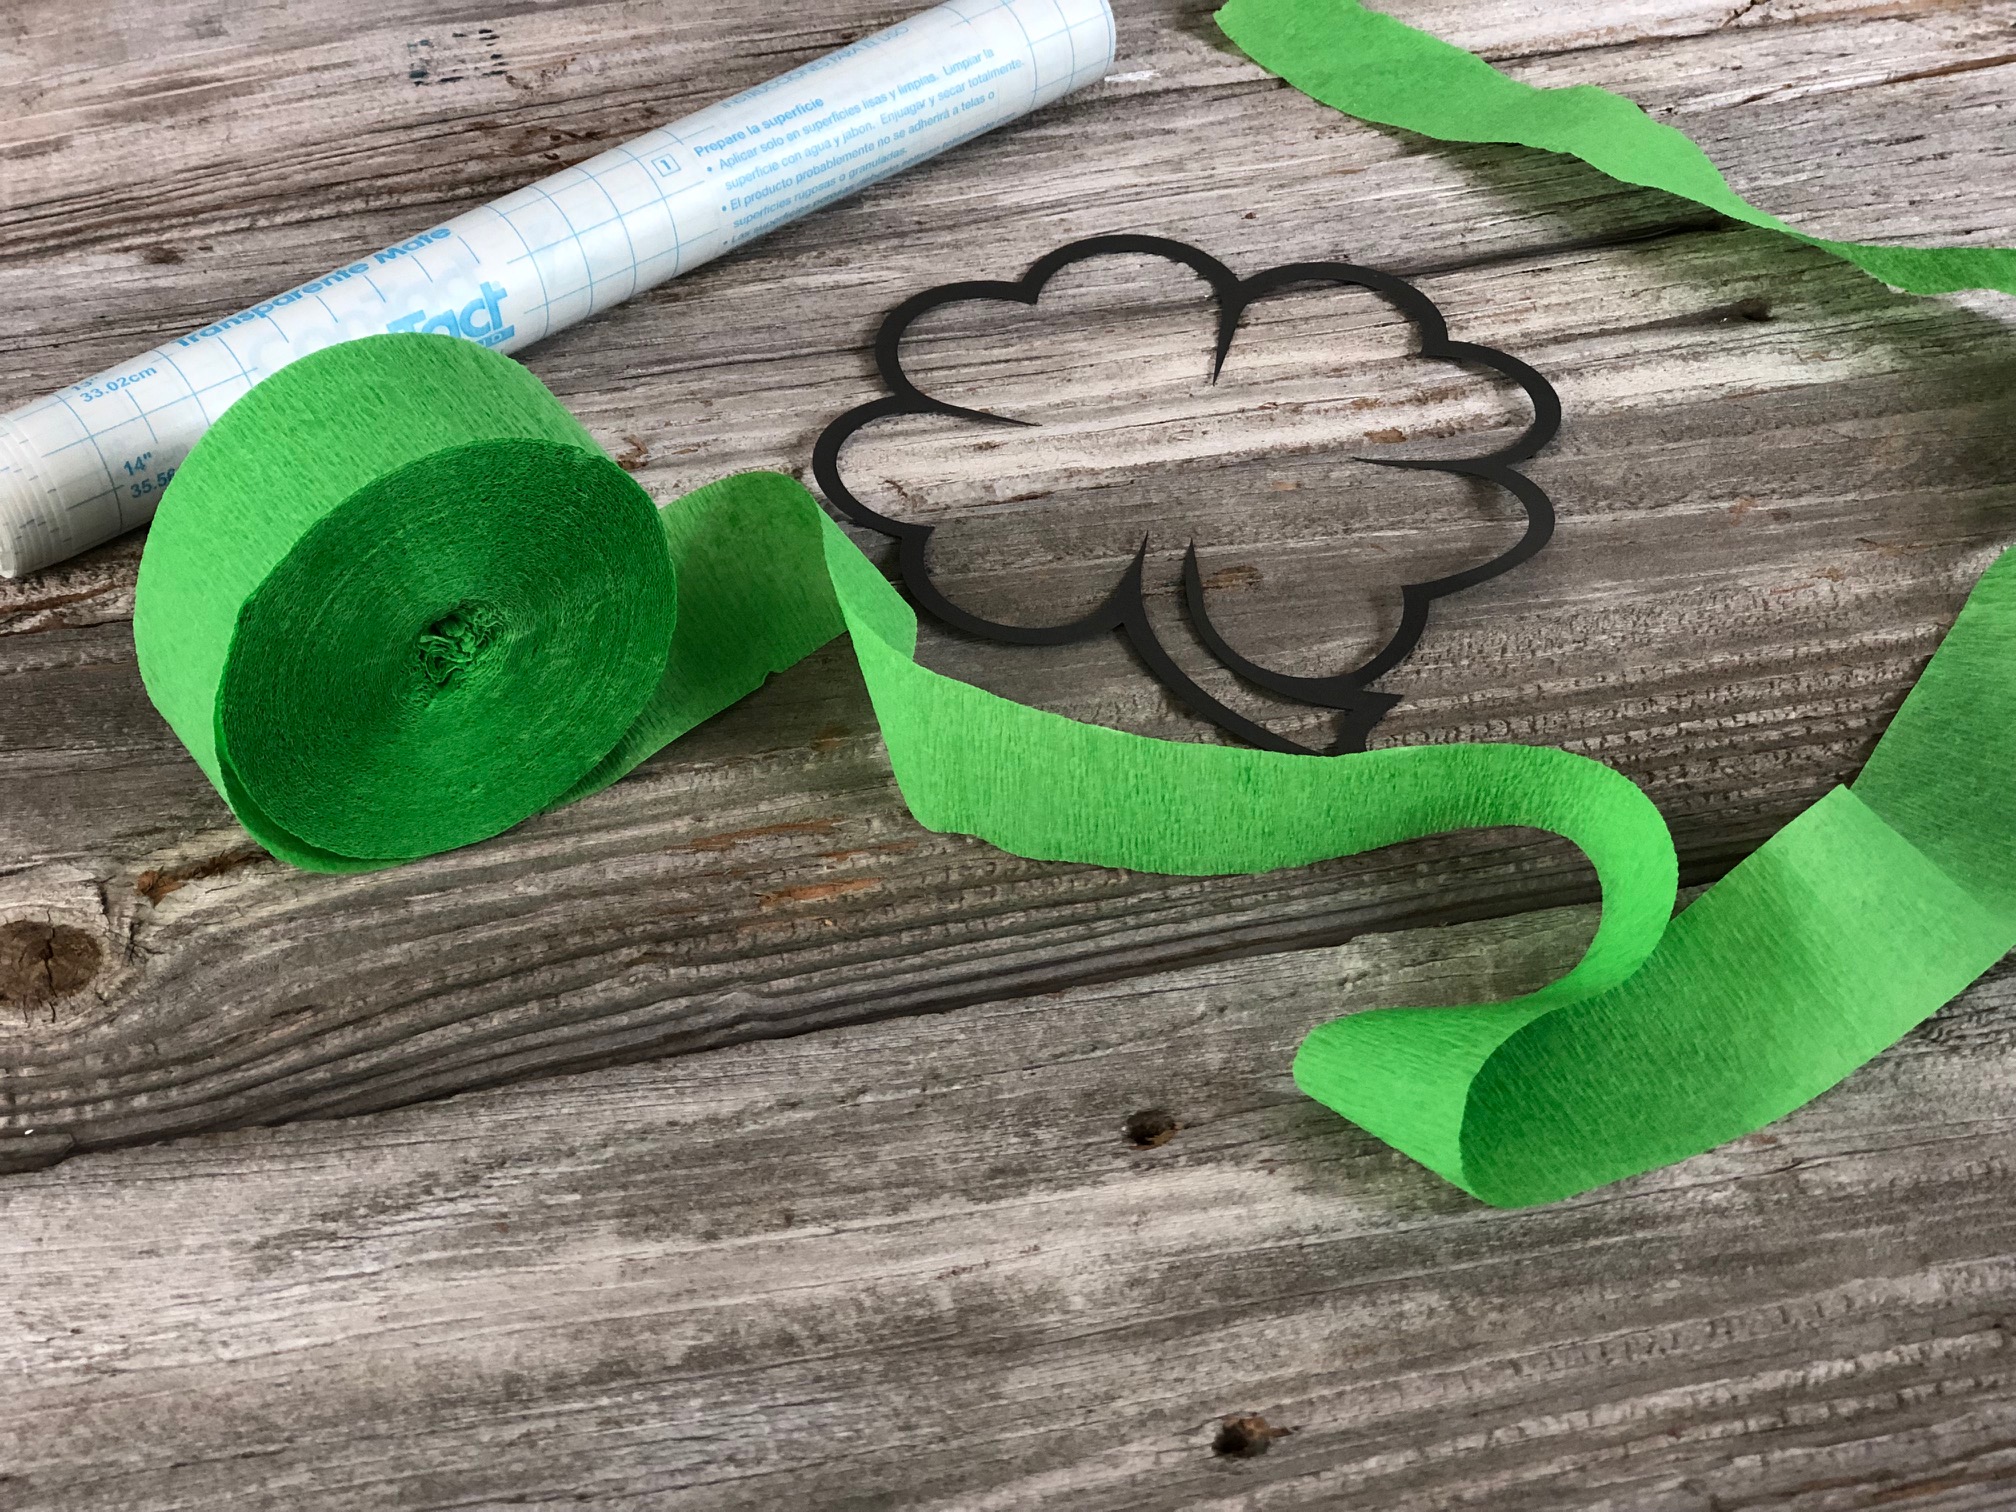 DIY St. Patrick's Day suncatcher, easy tutorial to make your own with your kiddos